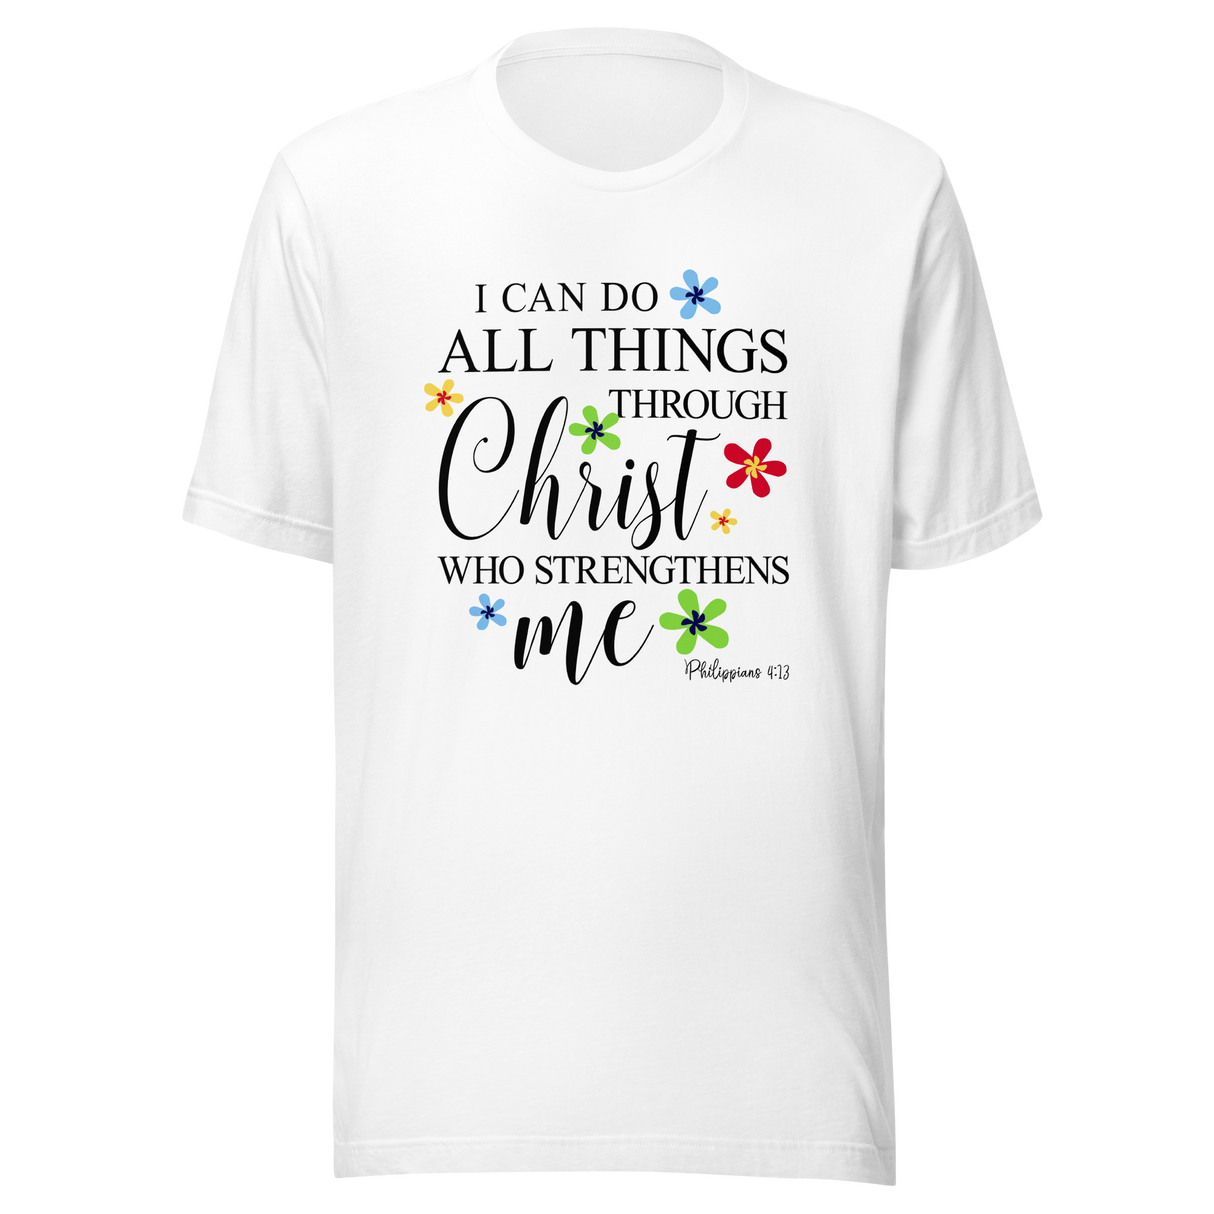 i-can-do-all-things-through-christ-who-strengthens-me-jesus-tee-mountains-t-shirt-christian-tee-t-shirt-tee#color_white